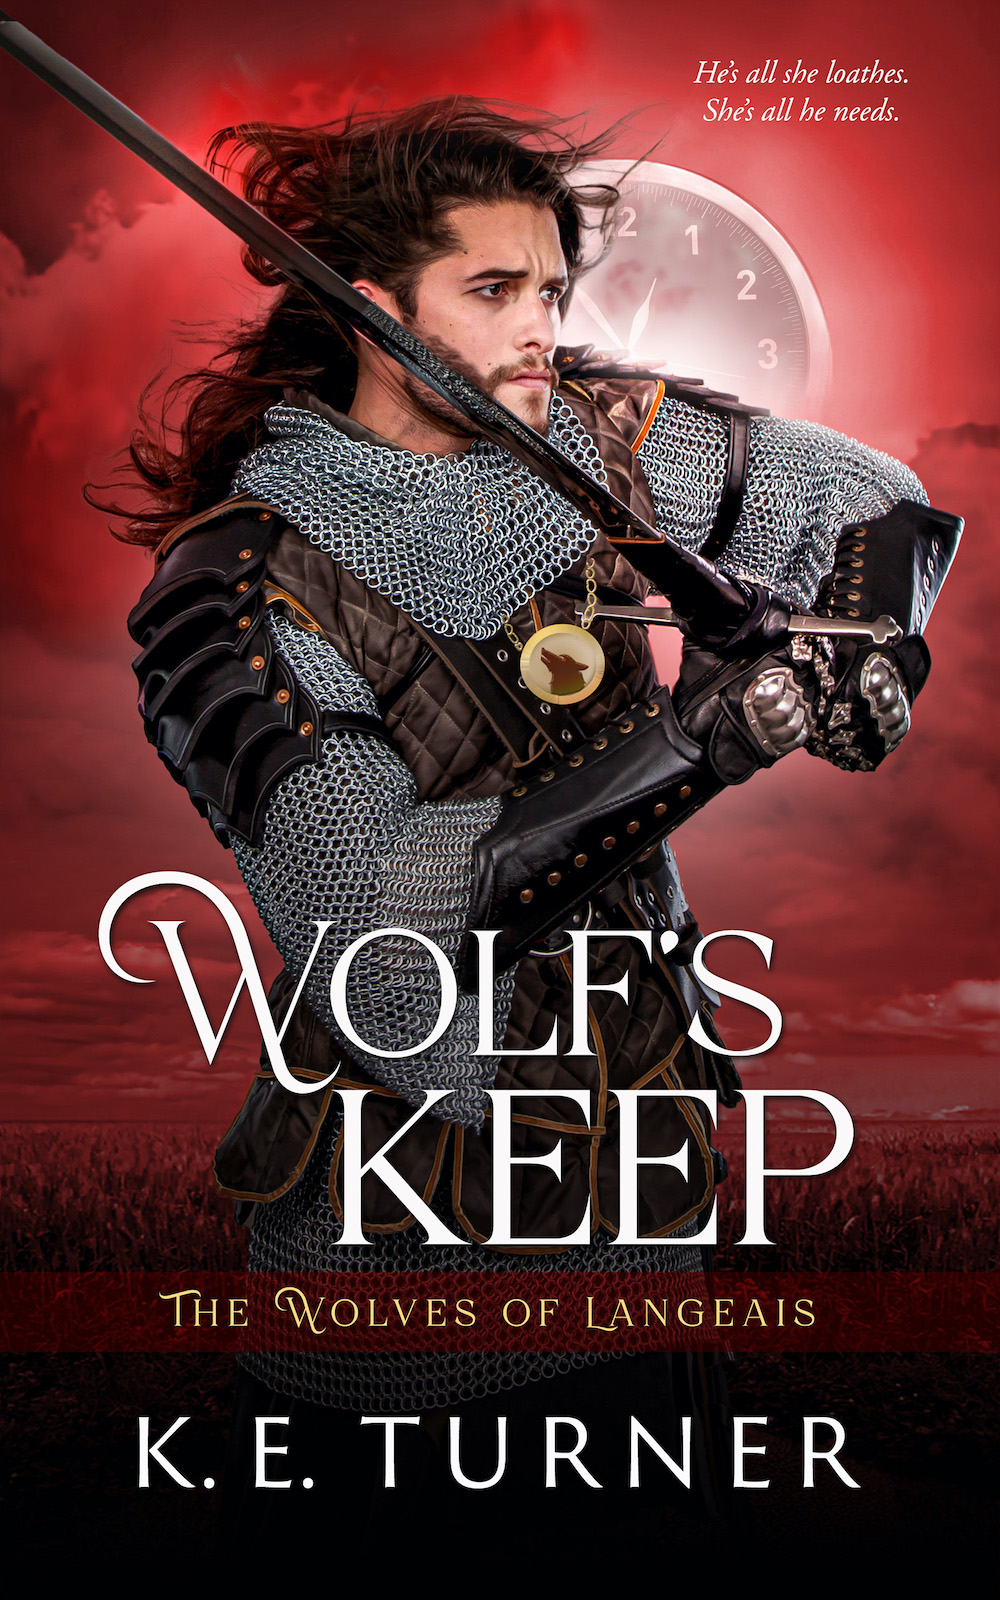 BOOK BLITZ: WOLF’S KEEP (THE WOLVES OF LANGEAIS #1) BY K.E. TURNER + GIVEAWAY